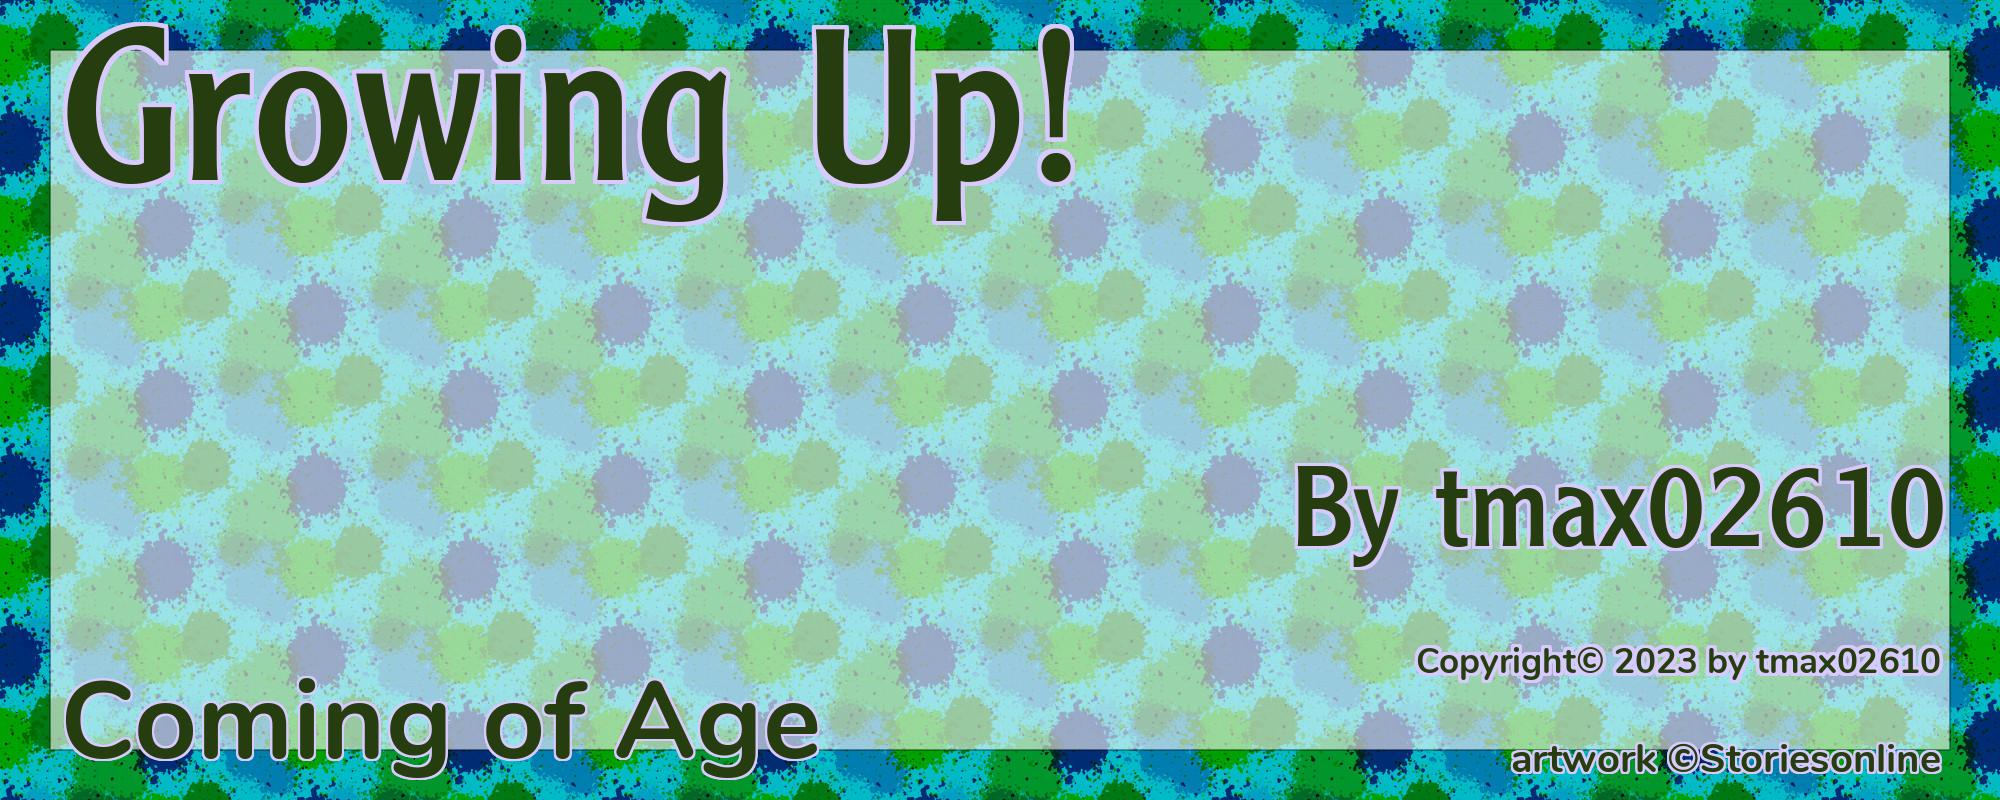 Growing Up! - Cover